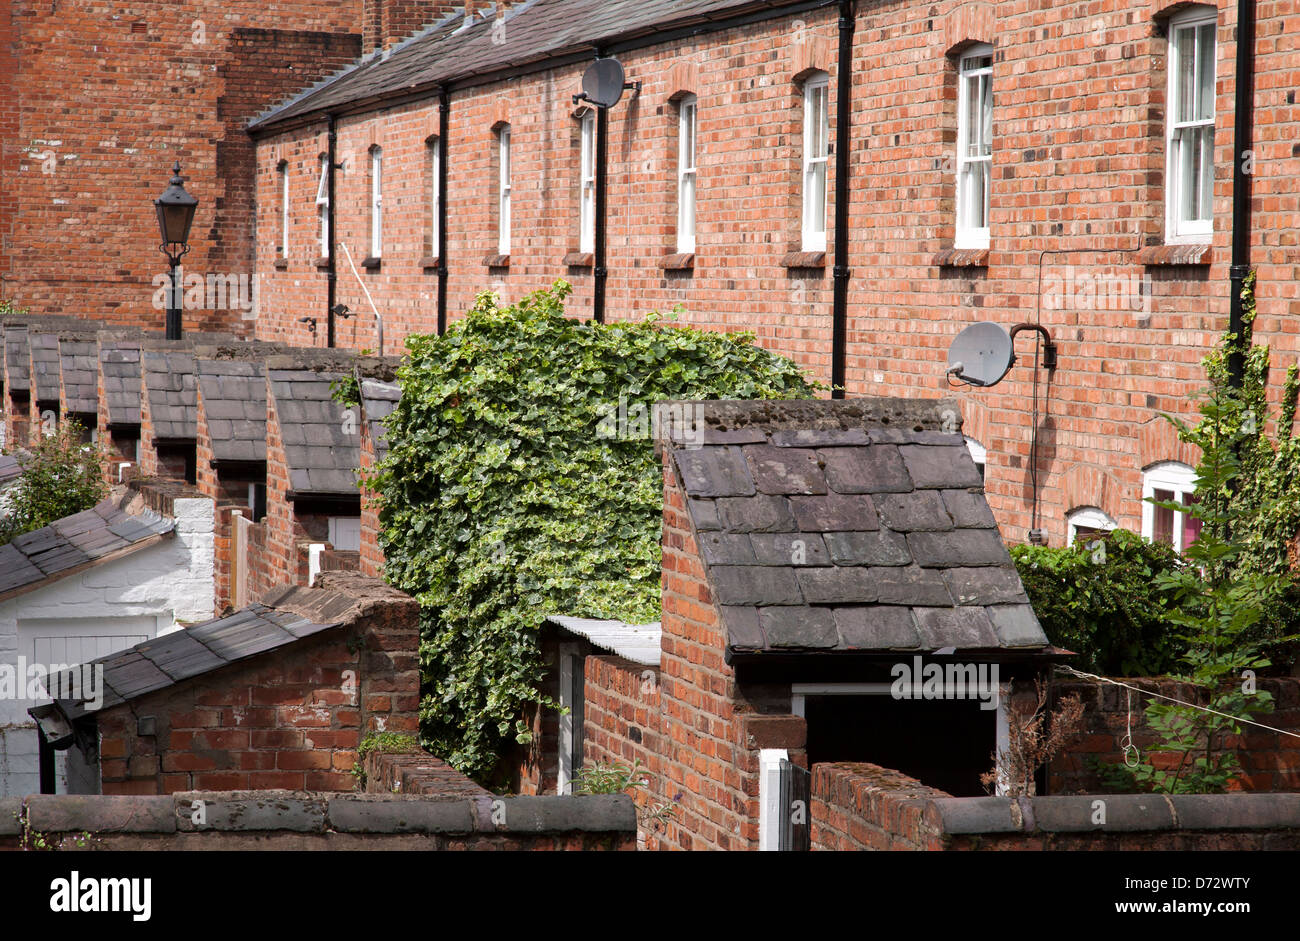 Back-to-back terrace houses in the U.K. Stock Photo